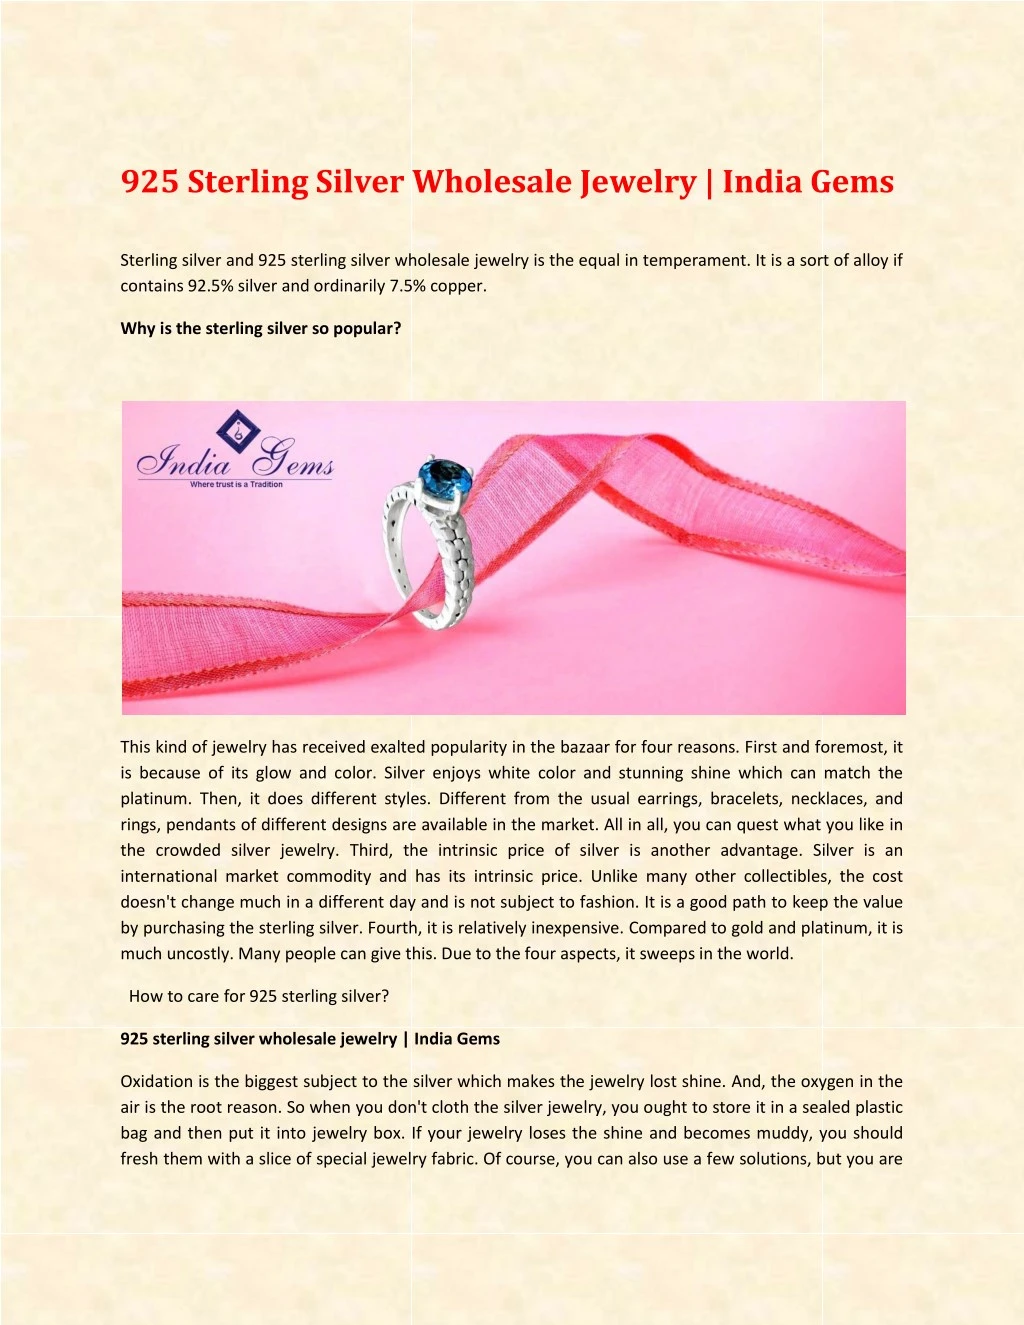 925 sterling silver wholesale jewelry india gems